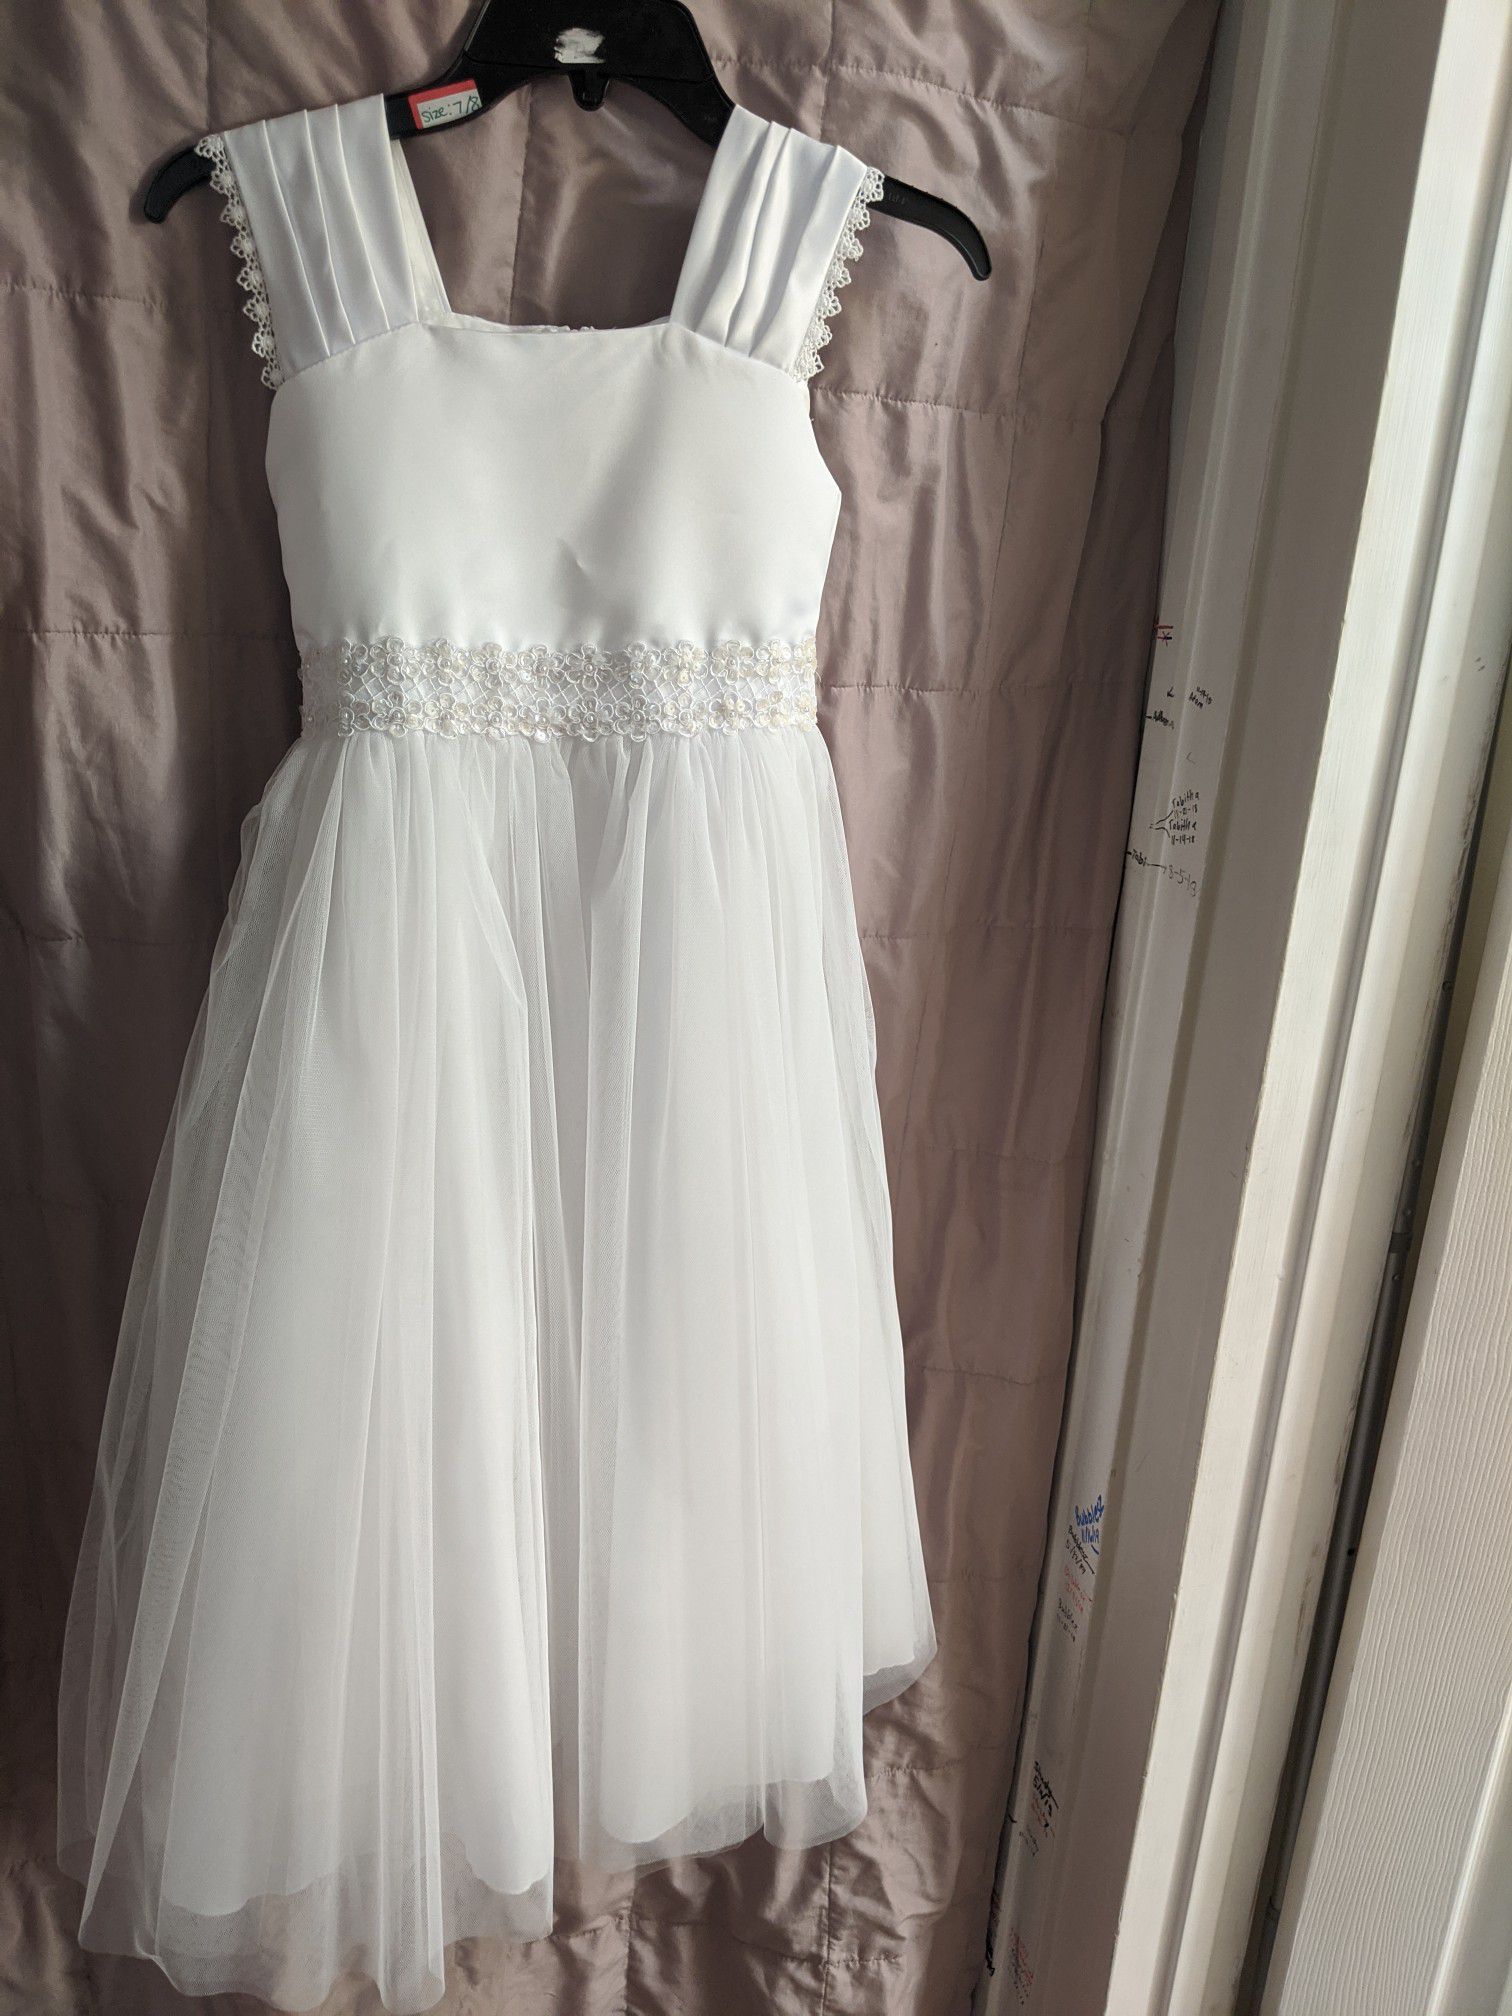 Beautiful white dress in size 7-8 Great for baptism, first communion, flower girl